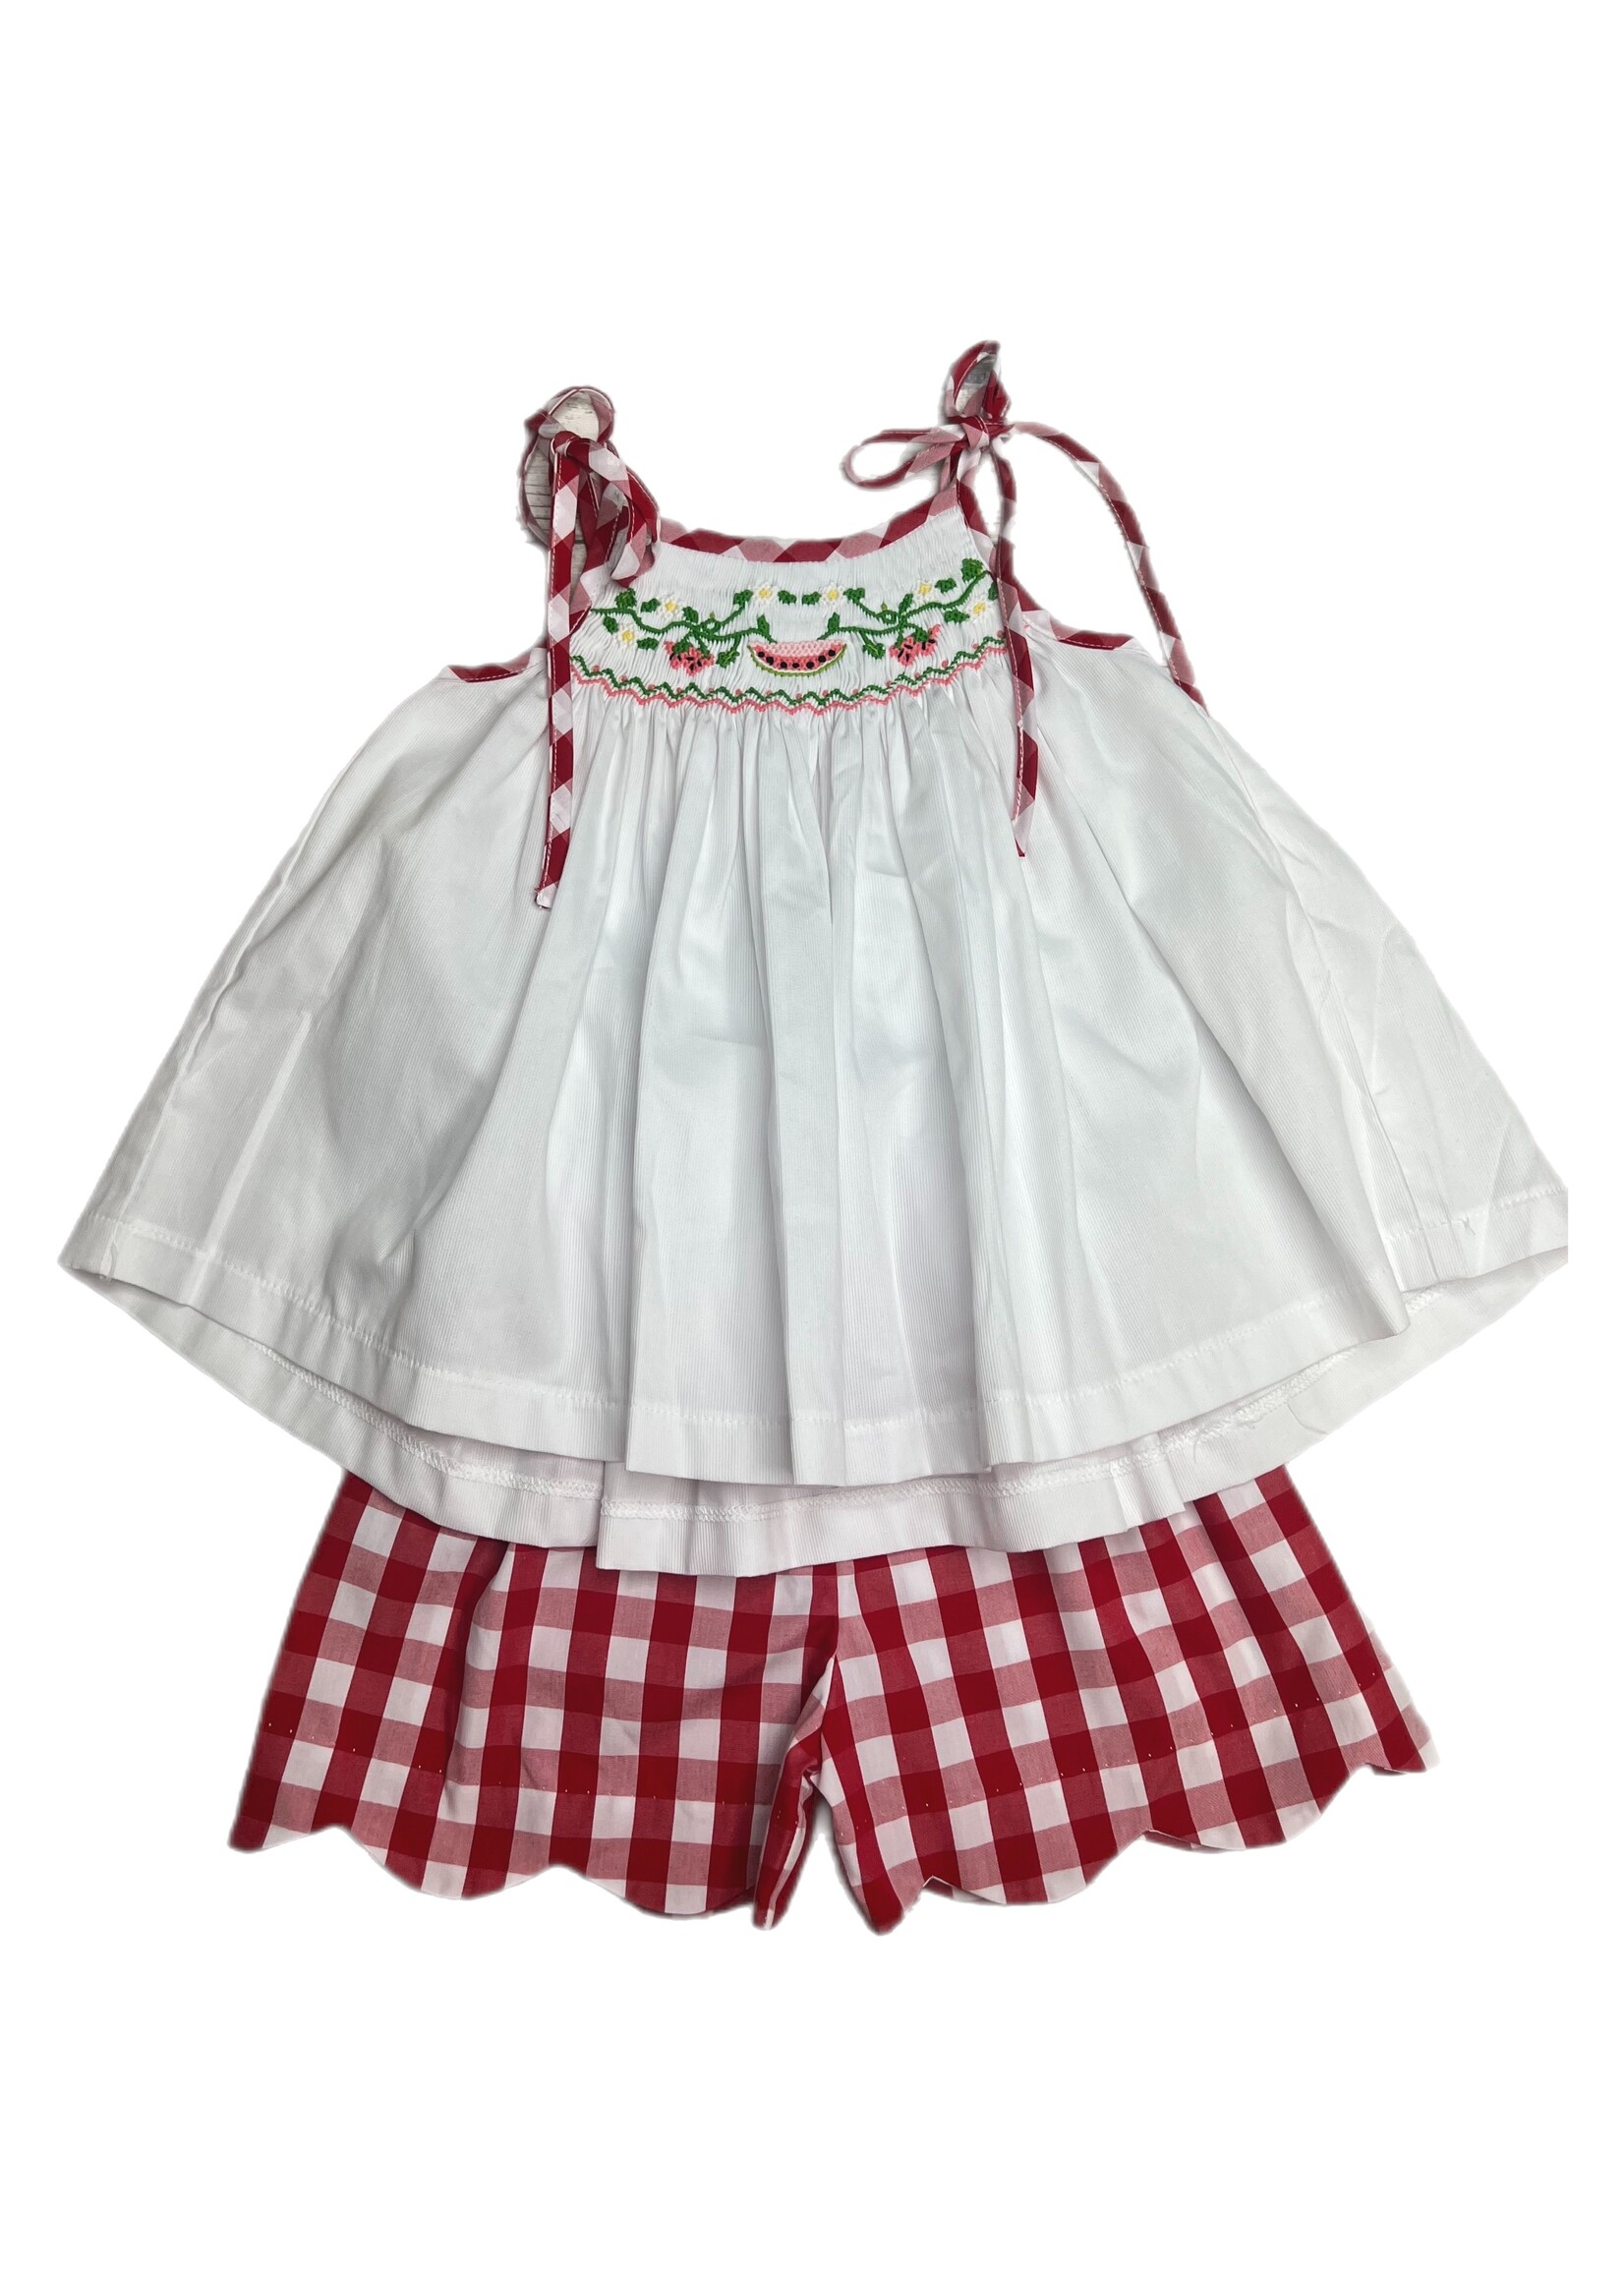 Delaney White Watermelon Top & Red Check Shorts